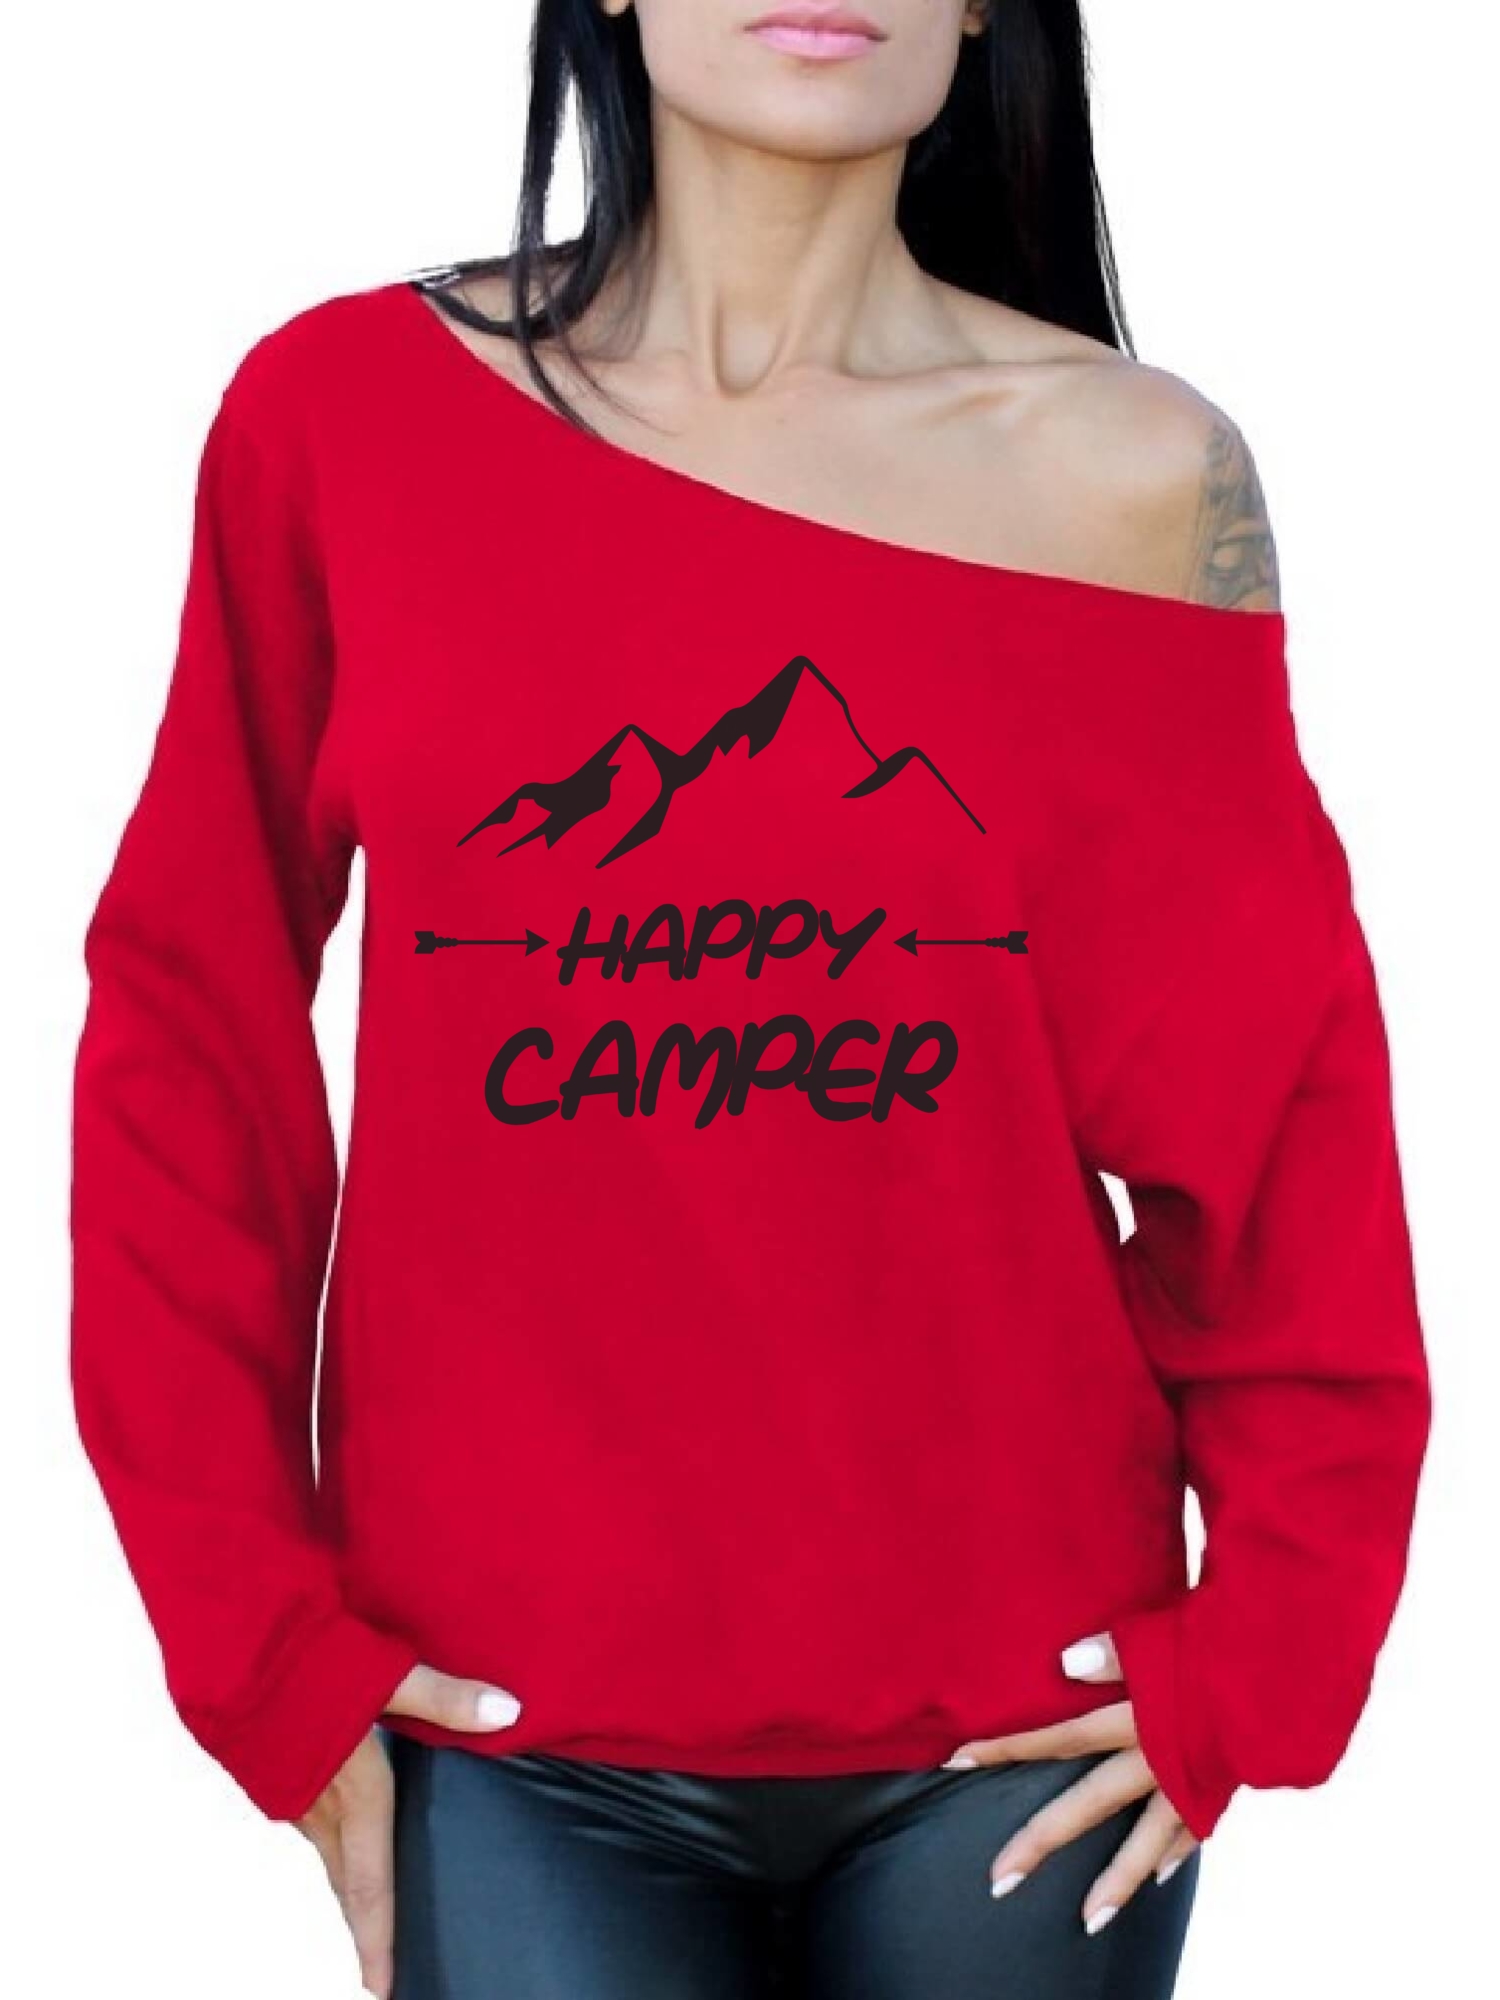 Awkward Styles Black Off Shoulder Sweater Happy Camper Off The Shoulder Sweatshirt Camper Off Shoulder Sweater for Mom Happy Camper Oversized Sweater for Women Camping Clothes Happy Camper Sweatshirt - image 1 of 4